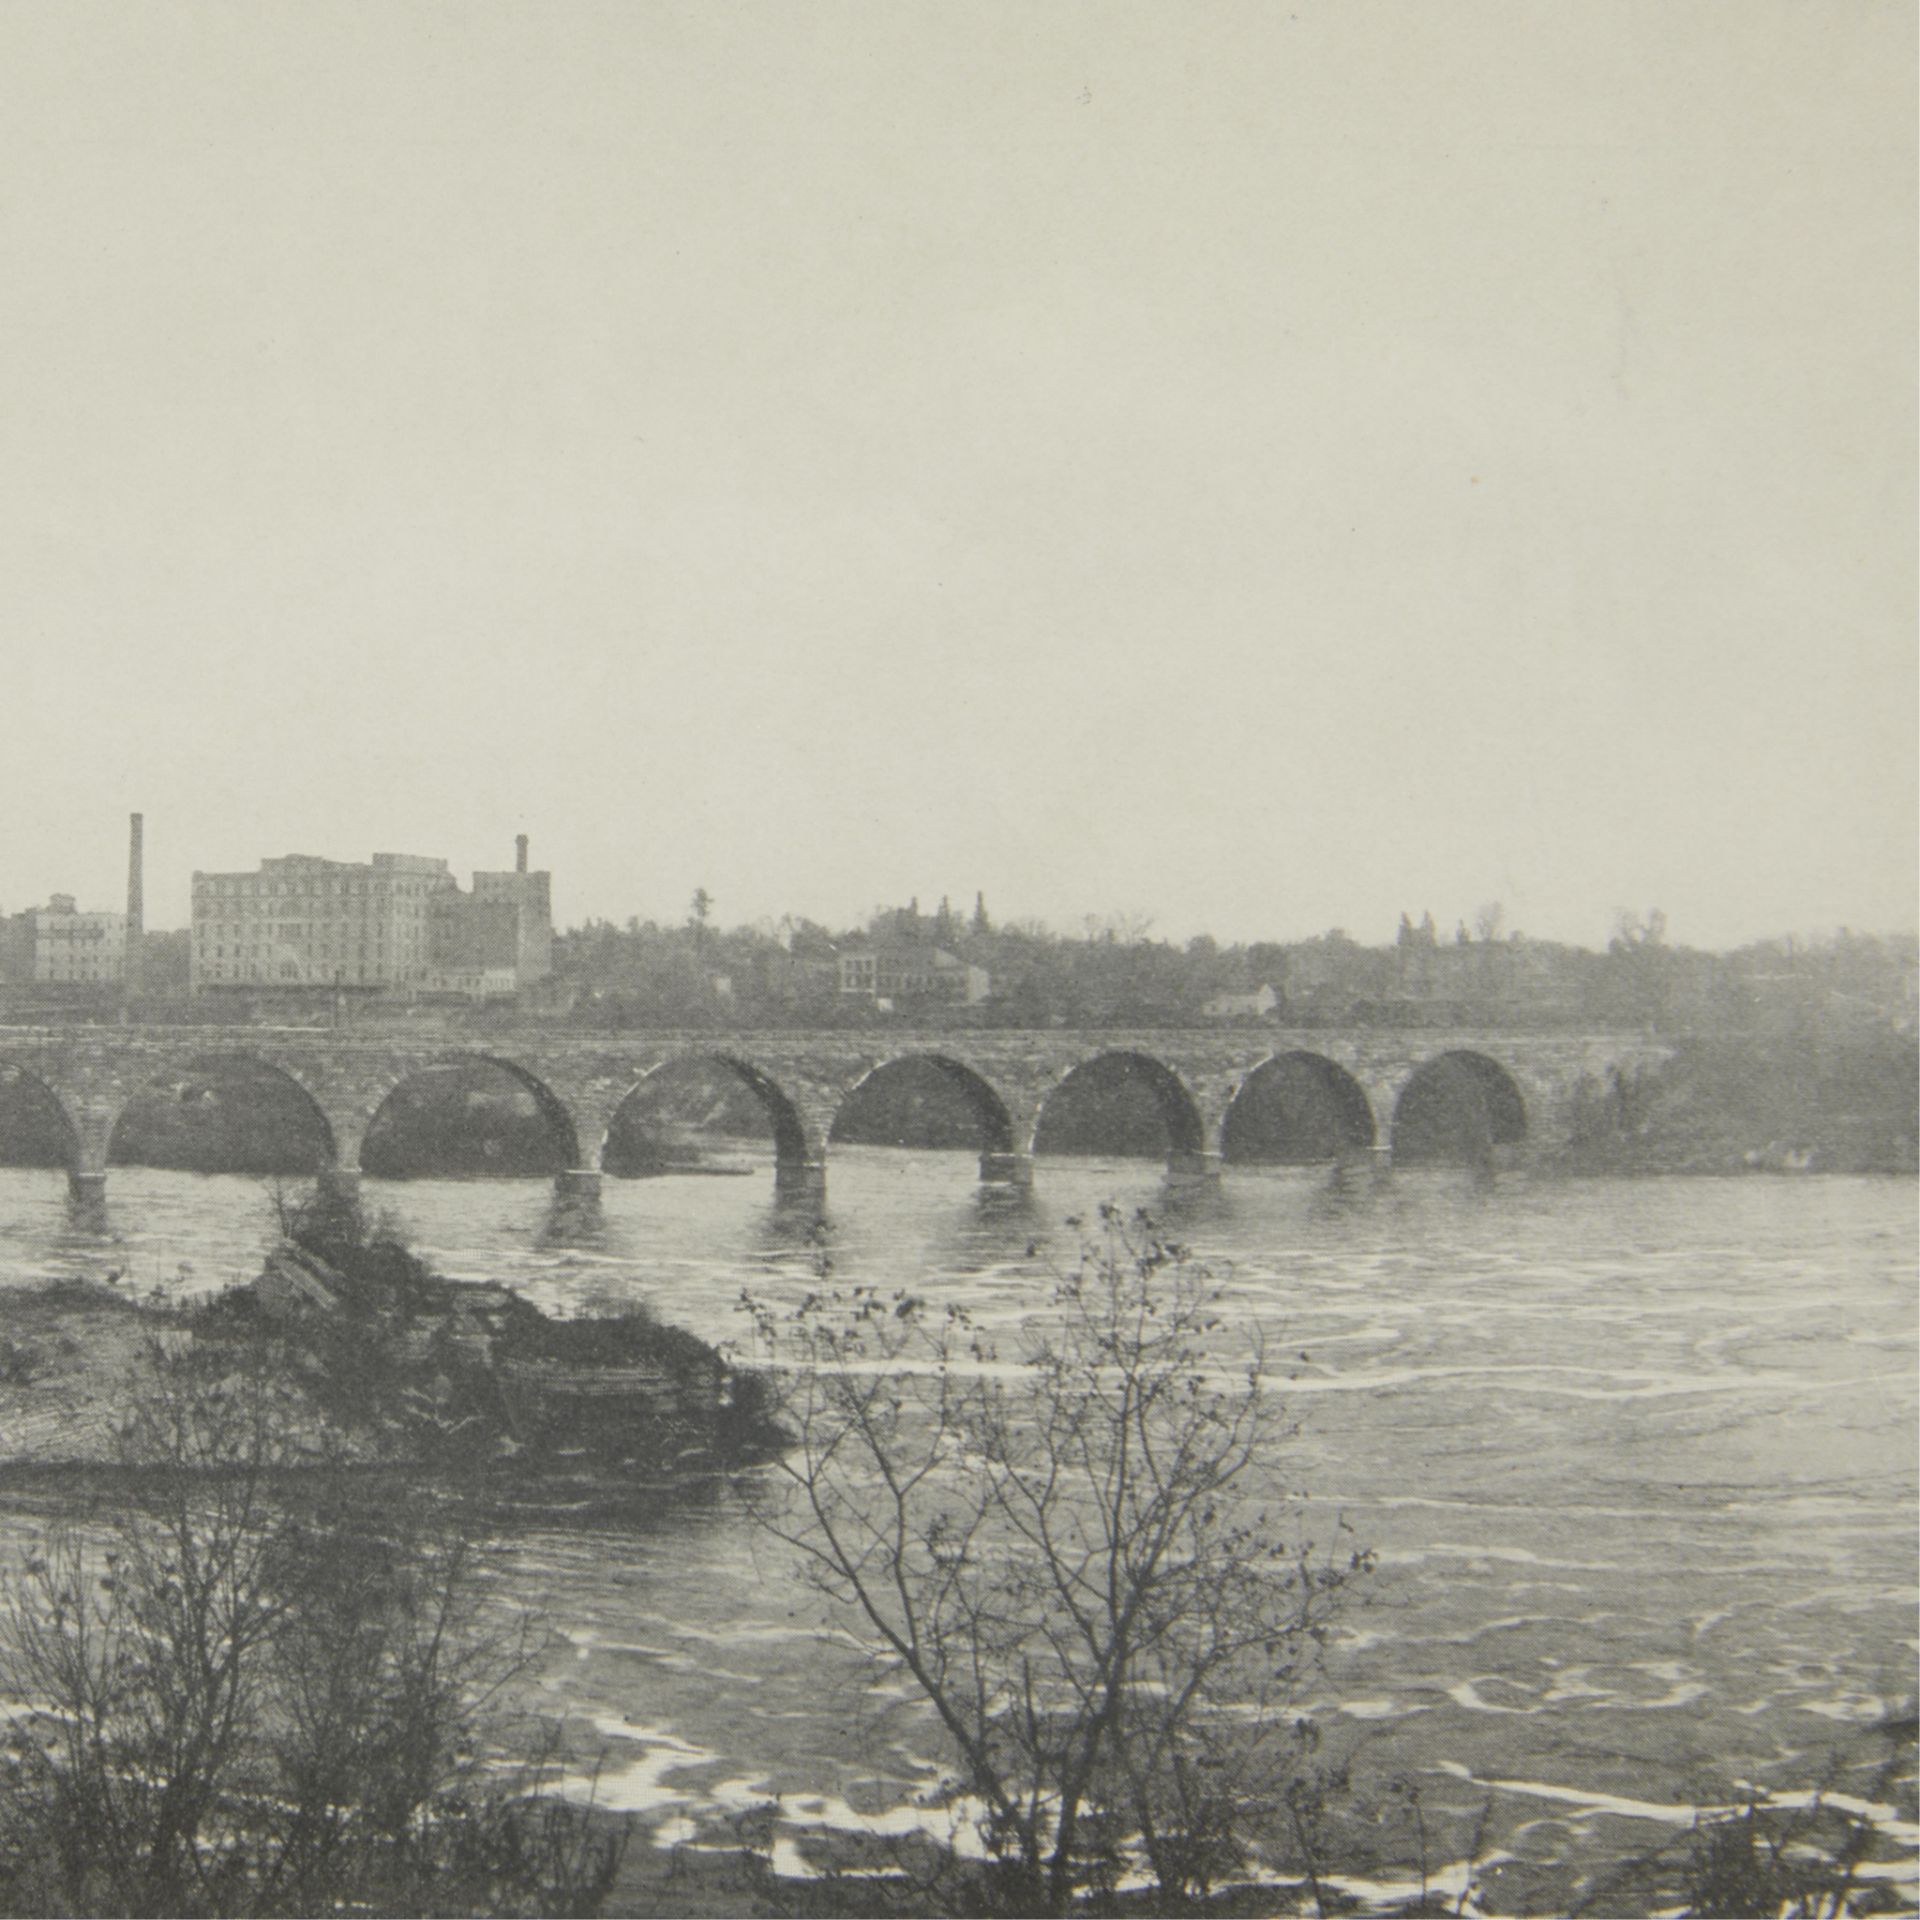 Photo of Stone Arch Bridge & Milling District MN - Image 4 of 6